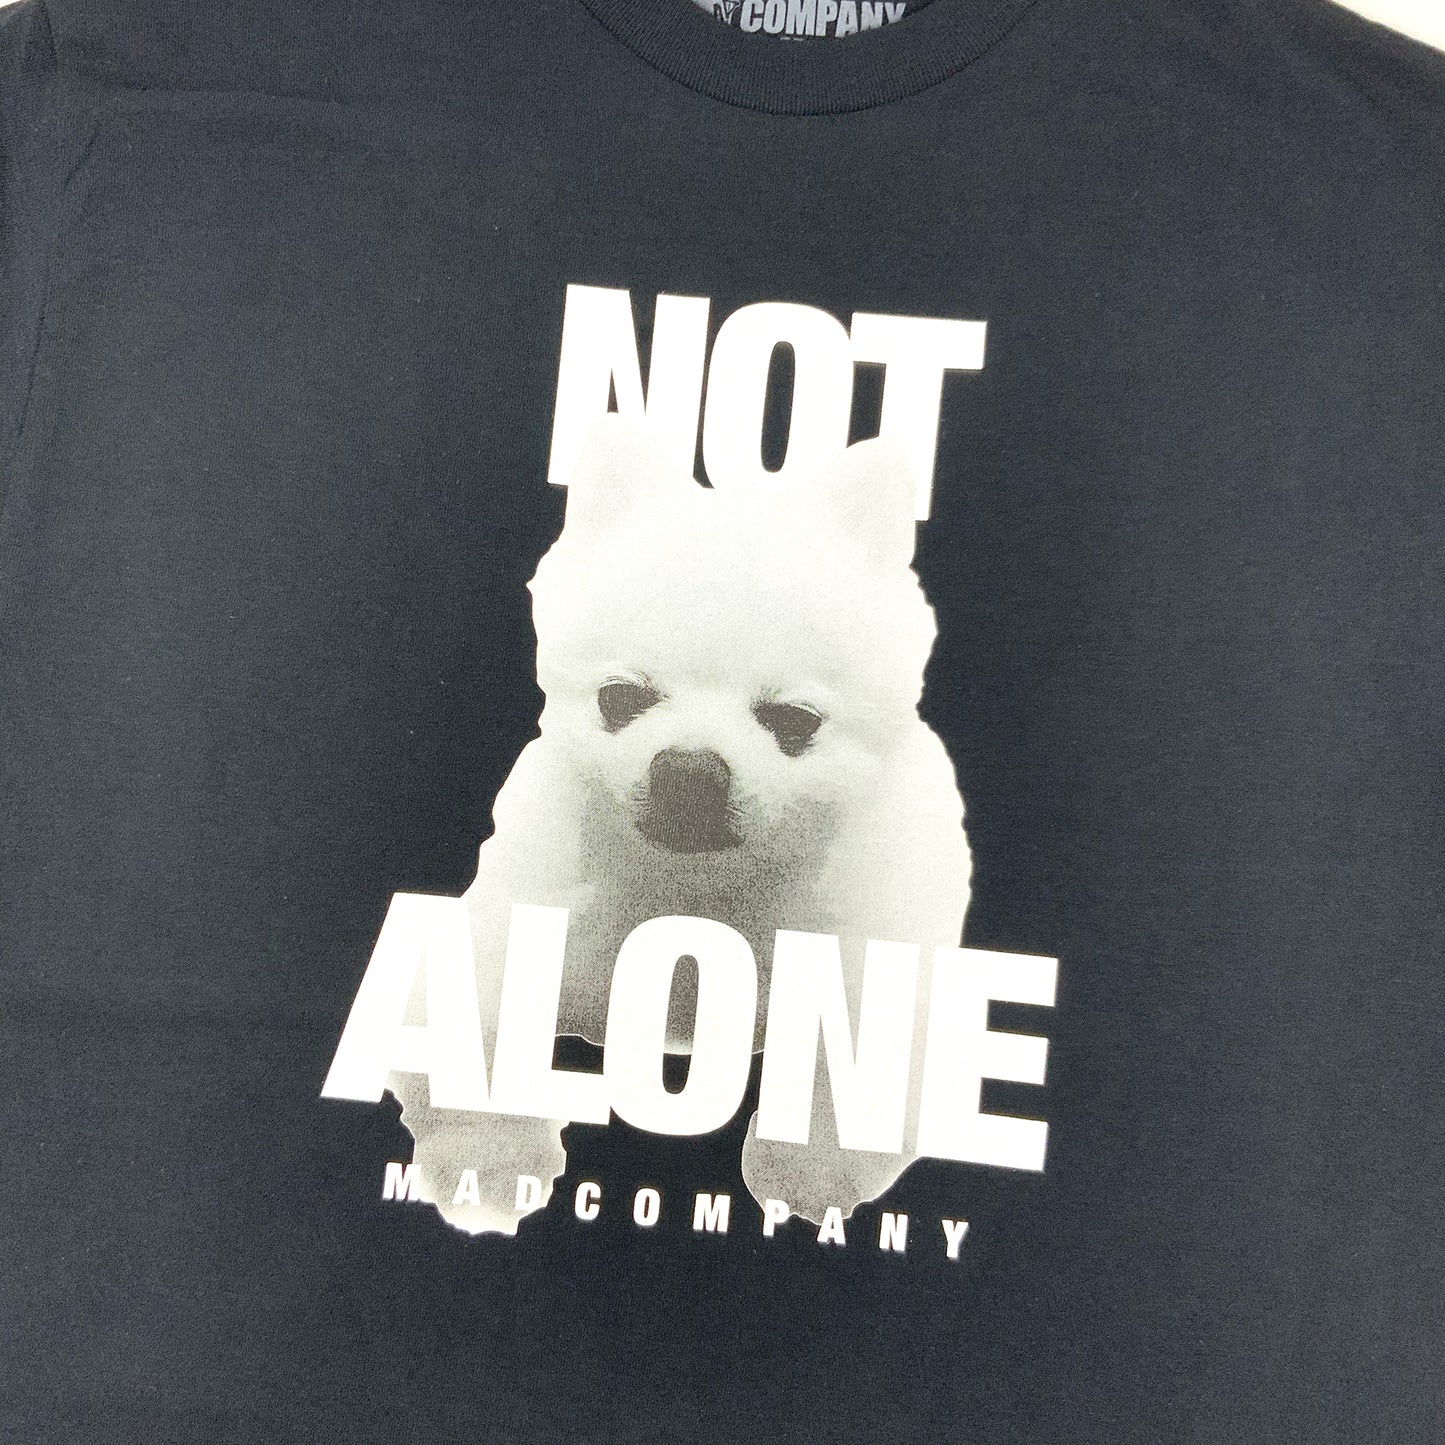 NOT ALONE TEE